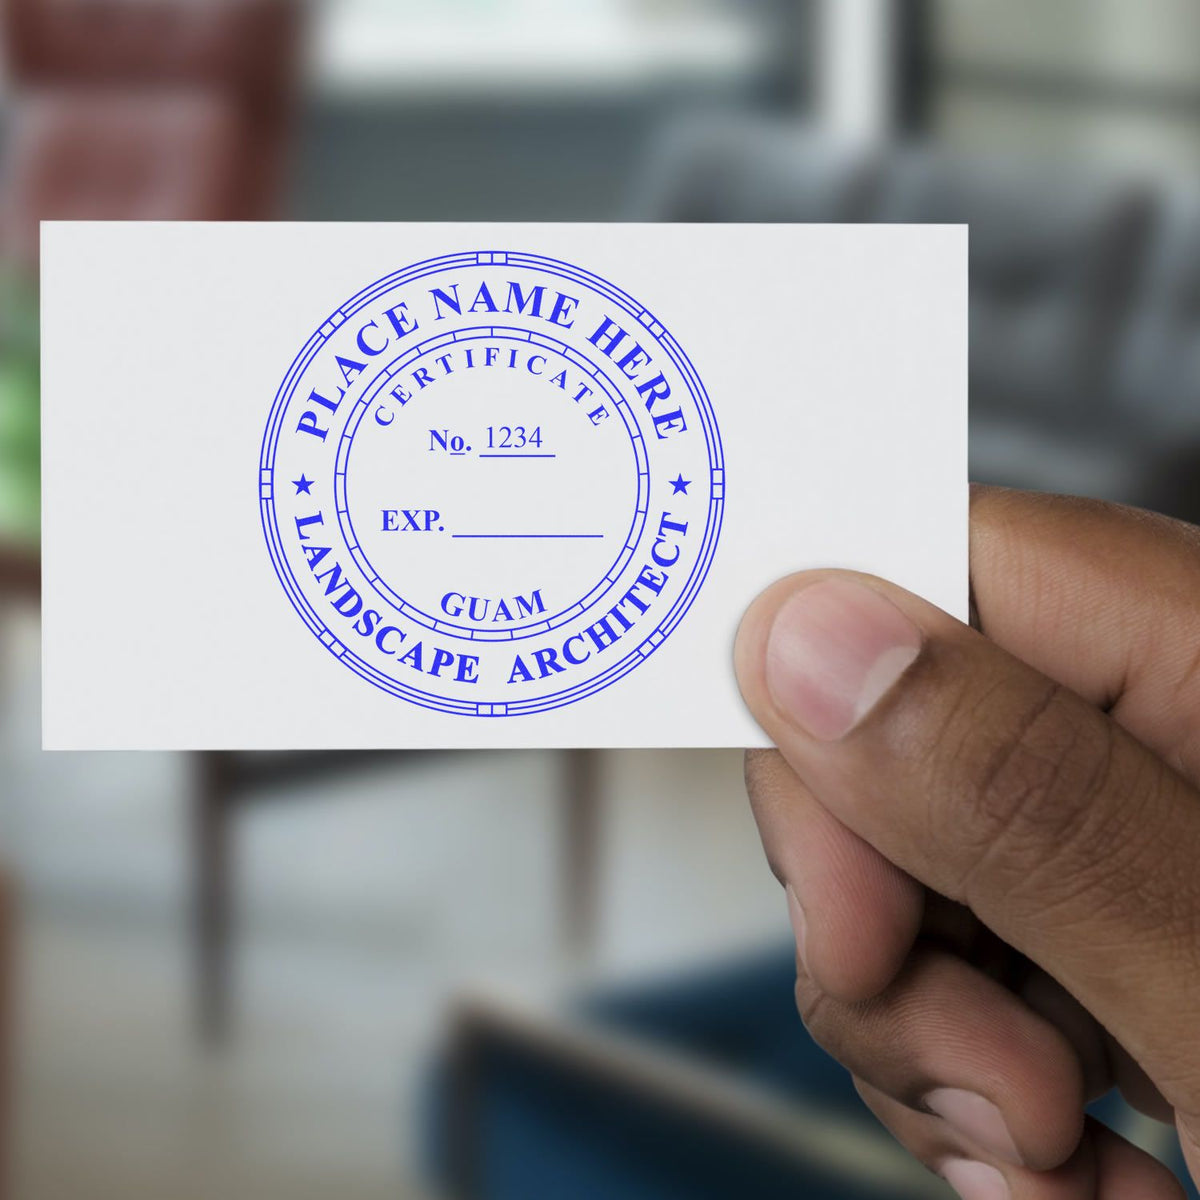 An alternative view of the Slim Pre-Inked Guam Landscape Architect Seal Stamp stamped on a sheet of paper showing the image in use